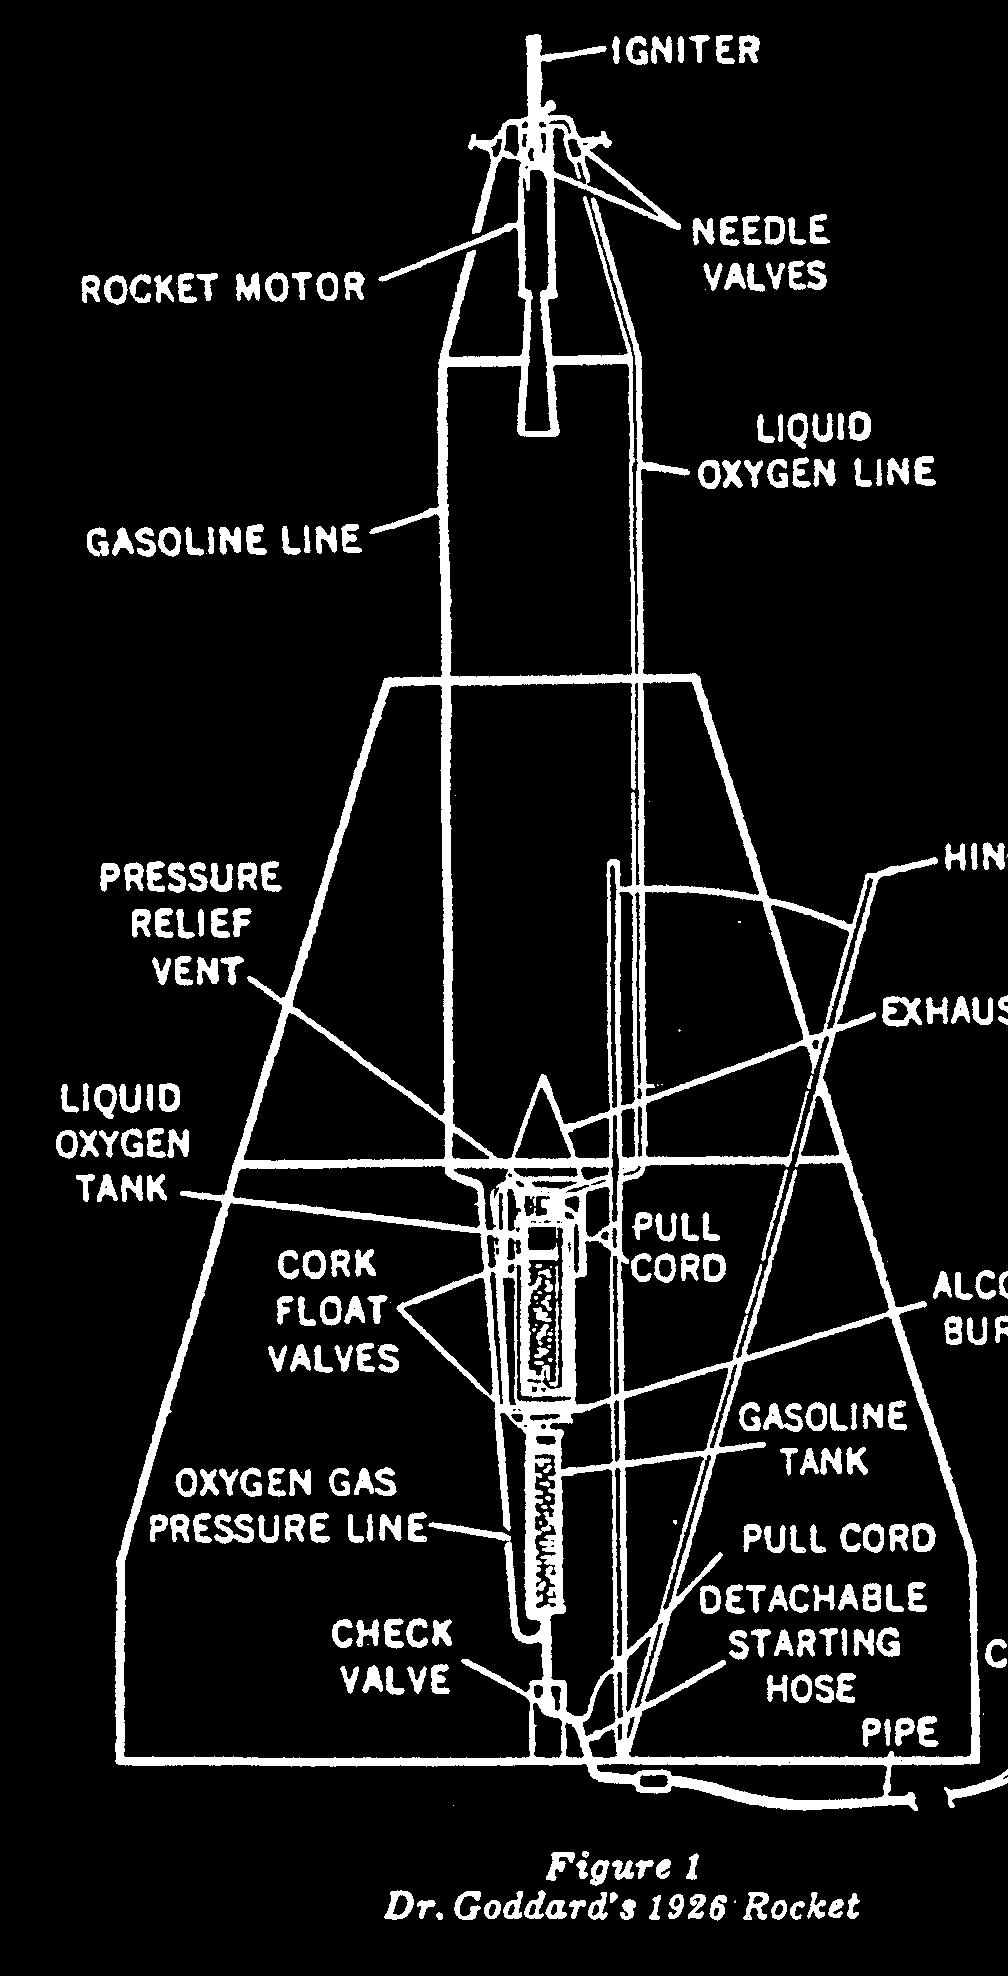 efficiency in a vacuum than in air. At the time, most people mistakenly believed that the presence of air was necessary for a rocket to push against.